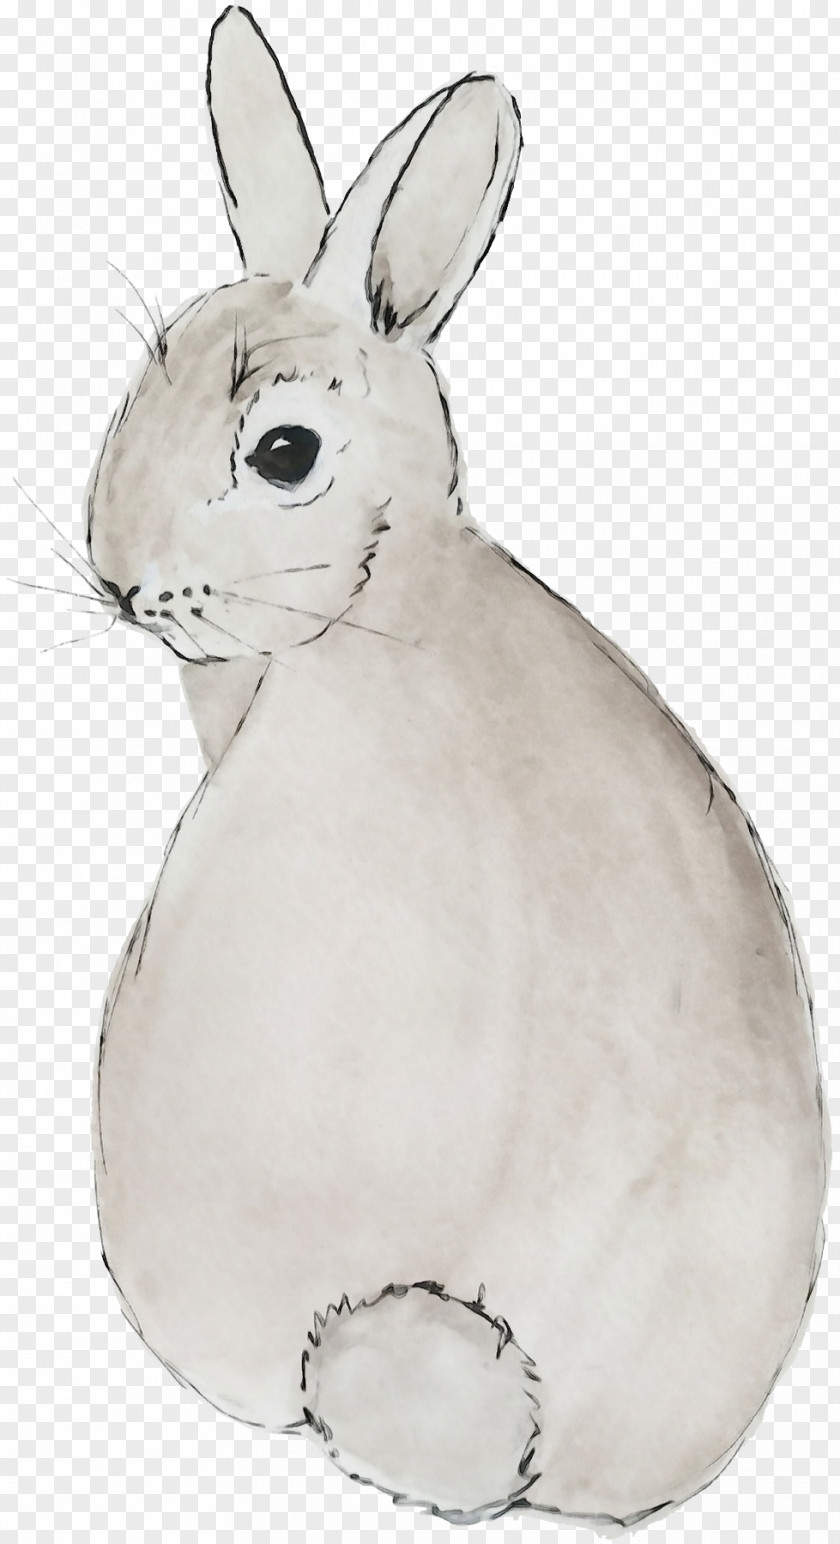 Snout Arctic Hare Rabbit Mountain Cottontail Domestic Rabbits And Hares White PNG